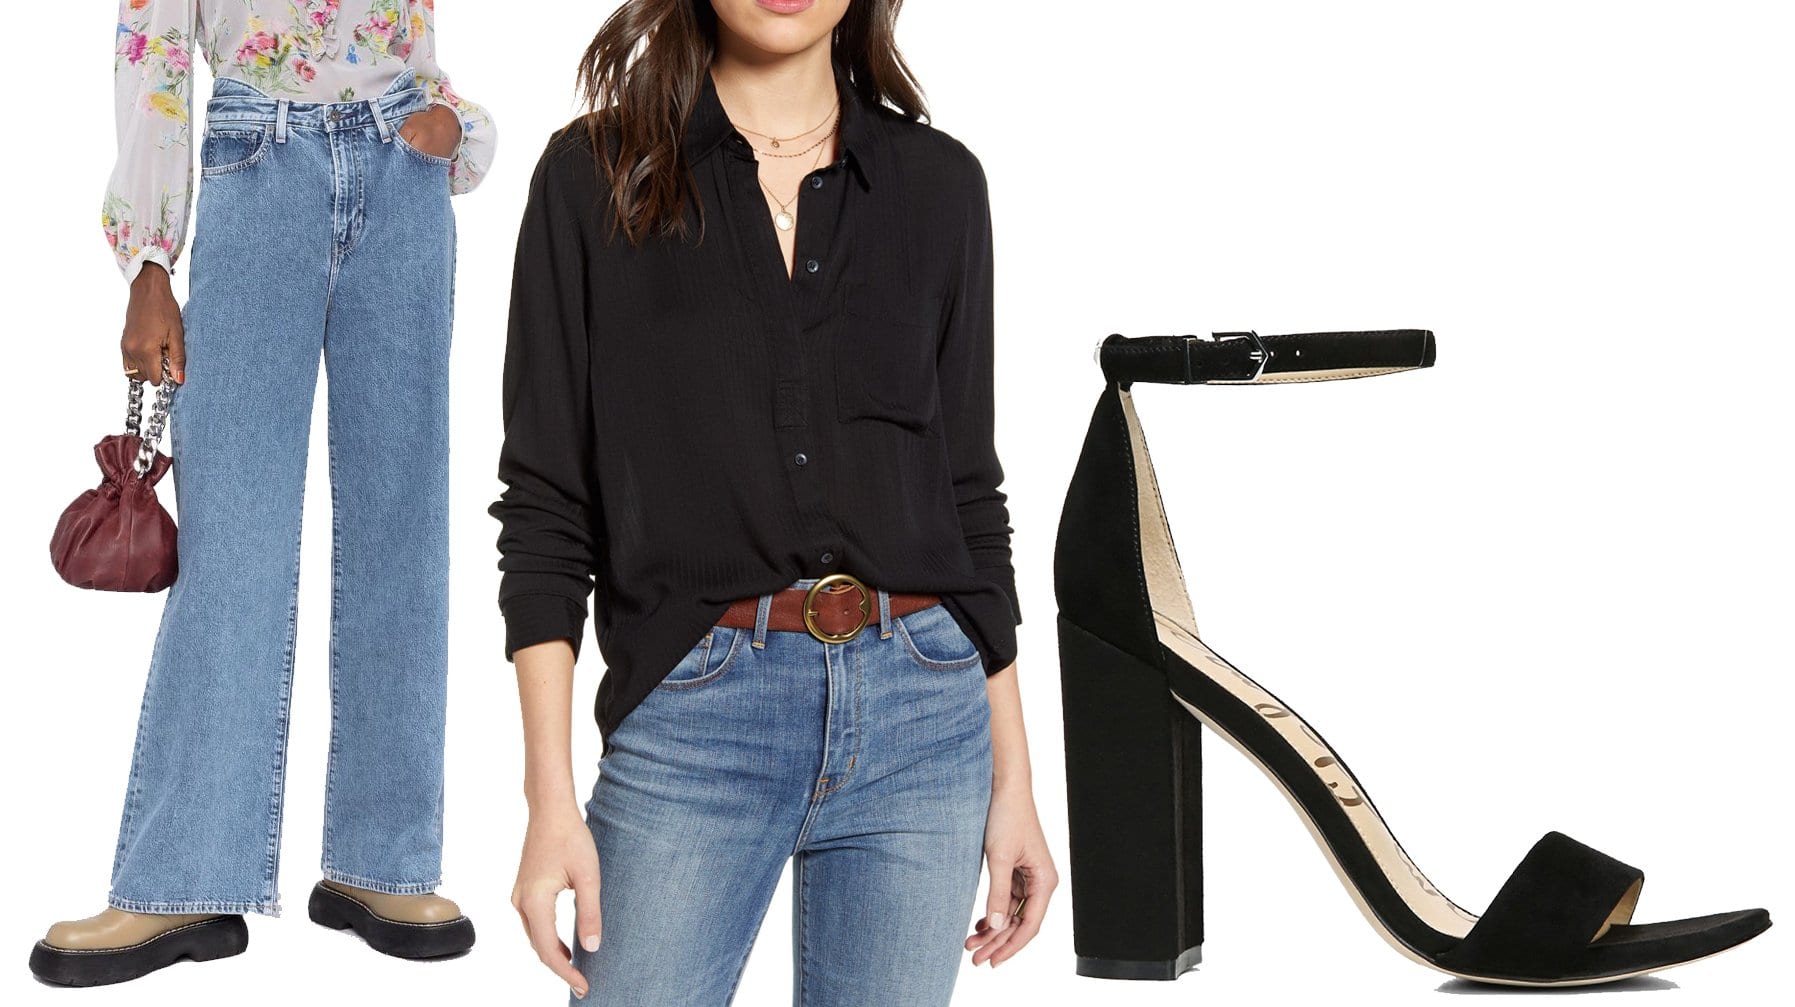 Elevated simplicity: Wide-leg jeans complemented by a classic dobby shirt and suede sandals